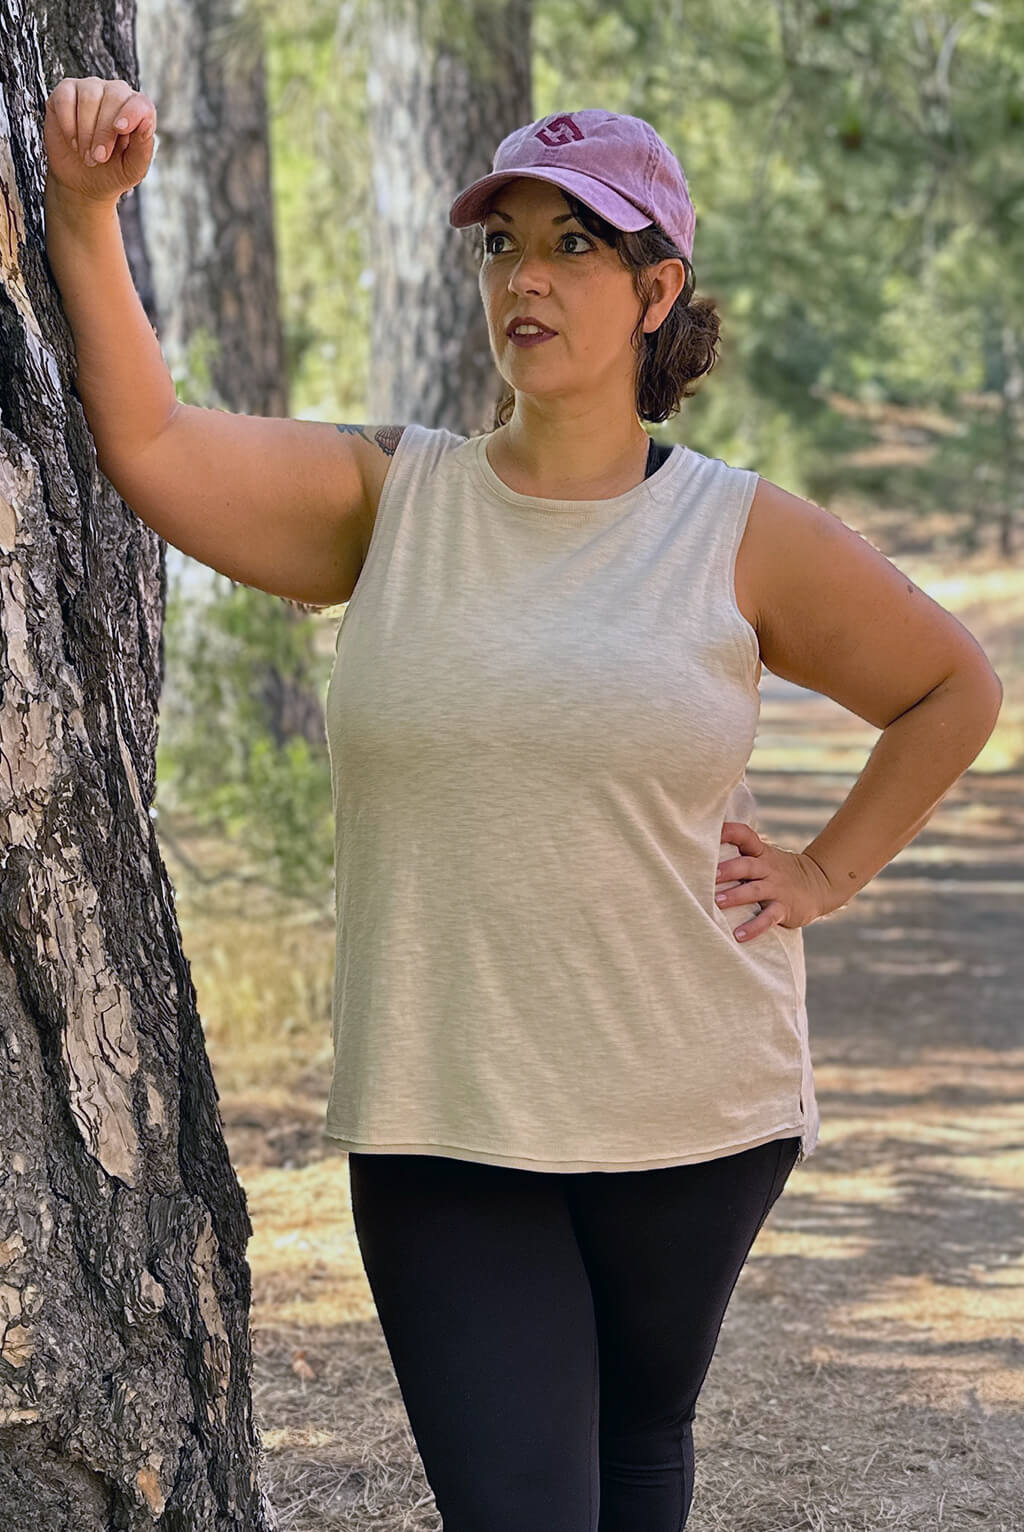 Plus size model leans on tree and looks off into distance wearing Textured Muscle Tank.